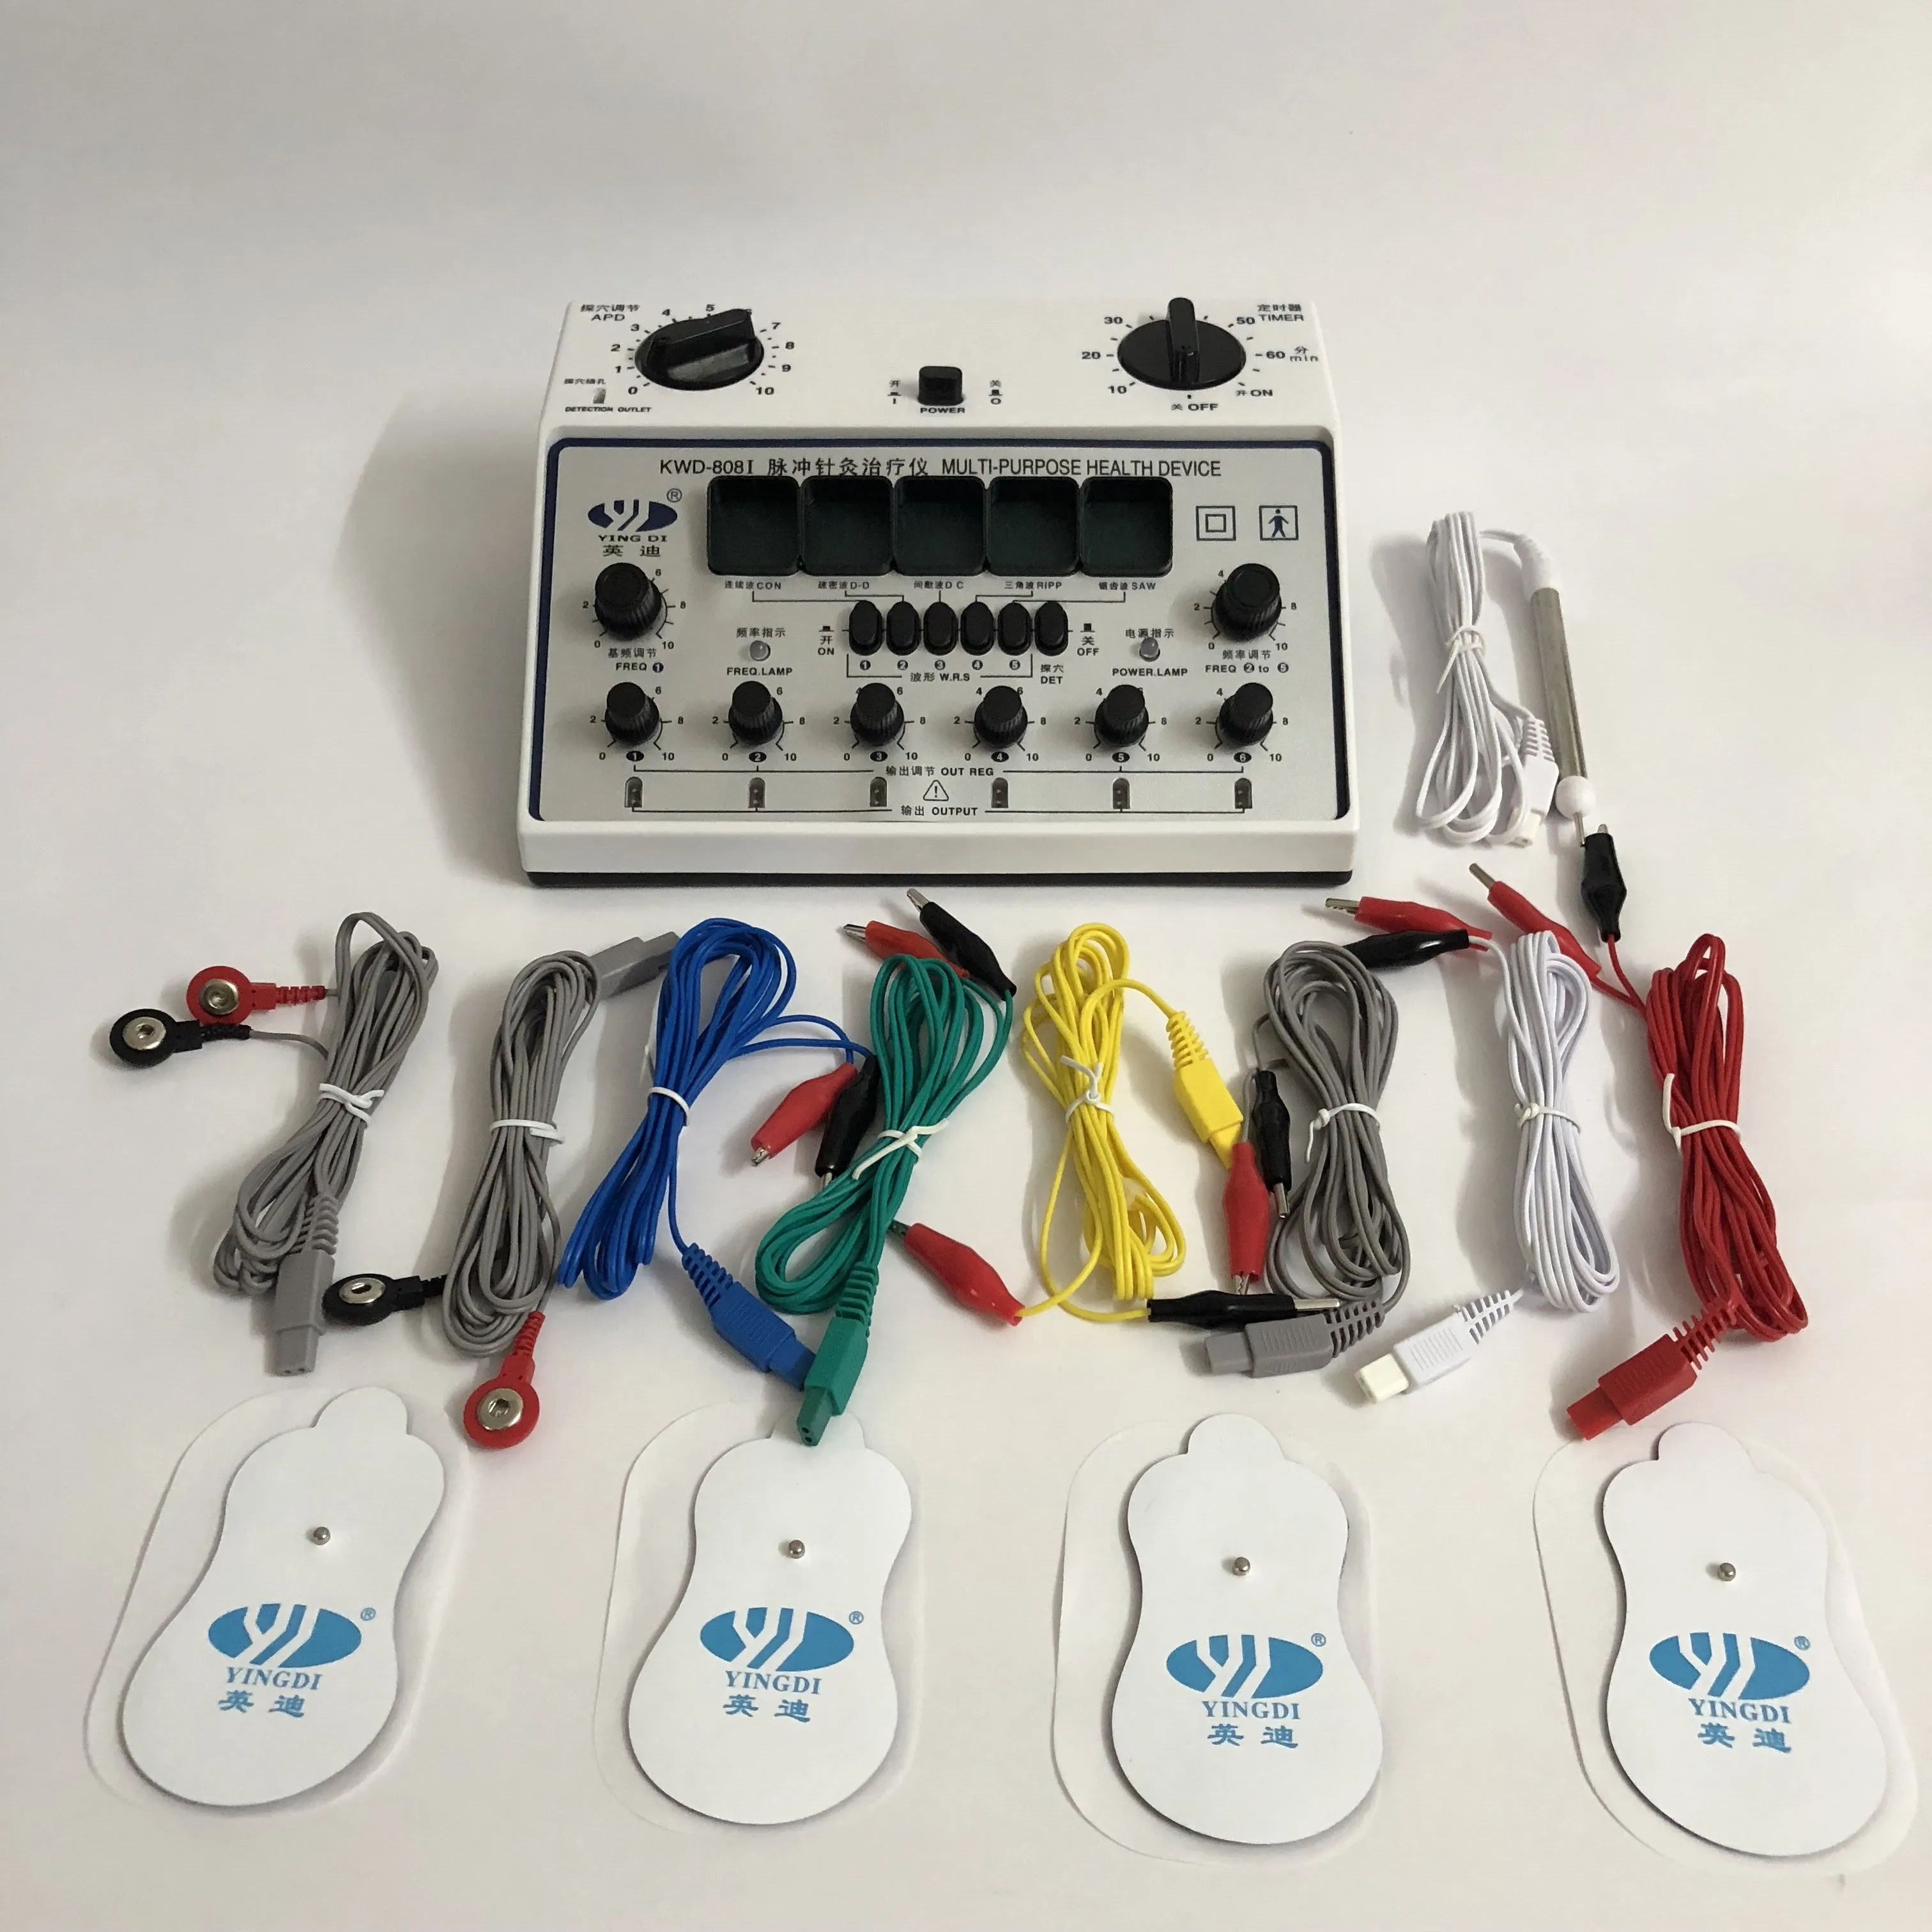 

Yingdi Pulse Electro therapy Device Professional Electrical Acupuncture Stimulator KWD808-I 6 Channels Output TENS massager